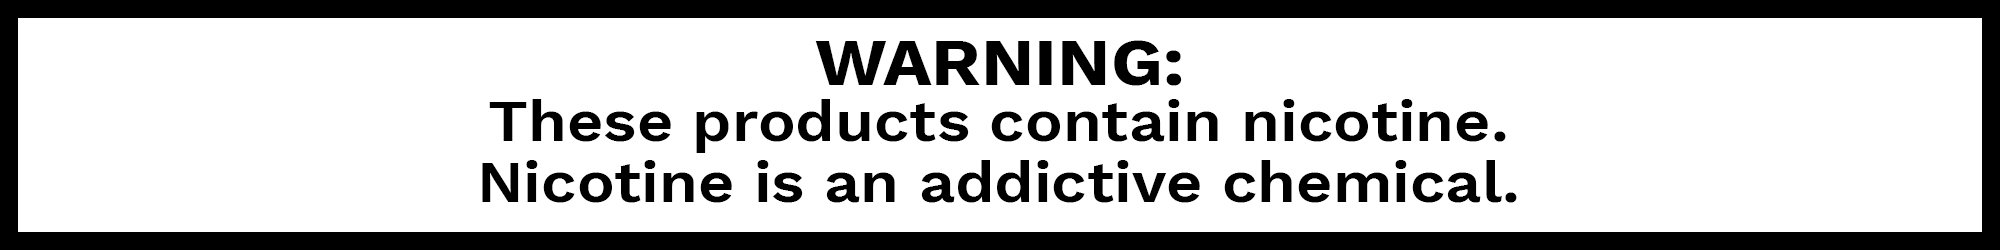 WARNING: These products contain nicotine.  Nicotine is an addictive chemical.